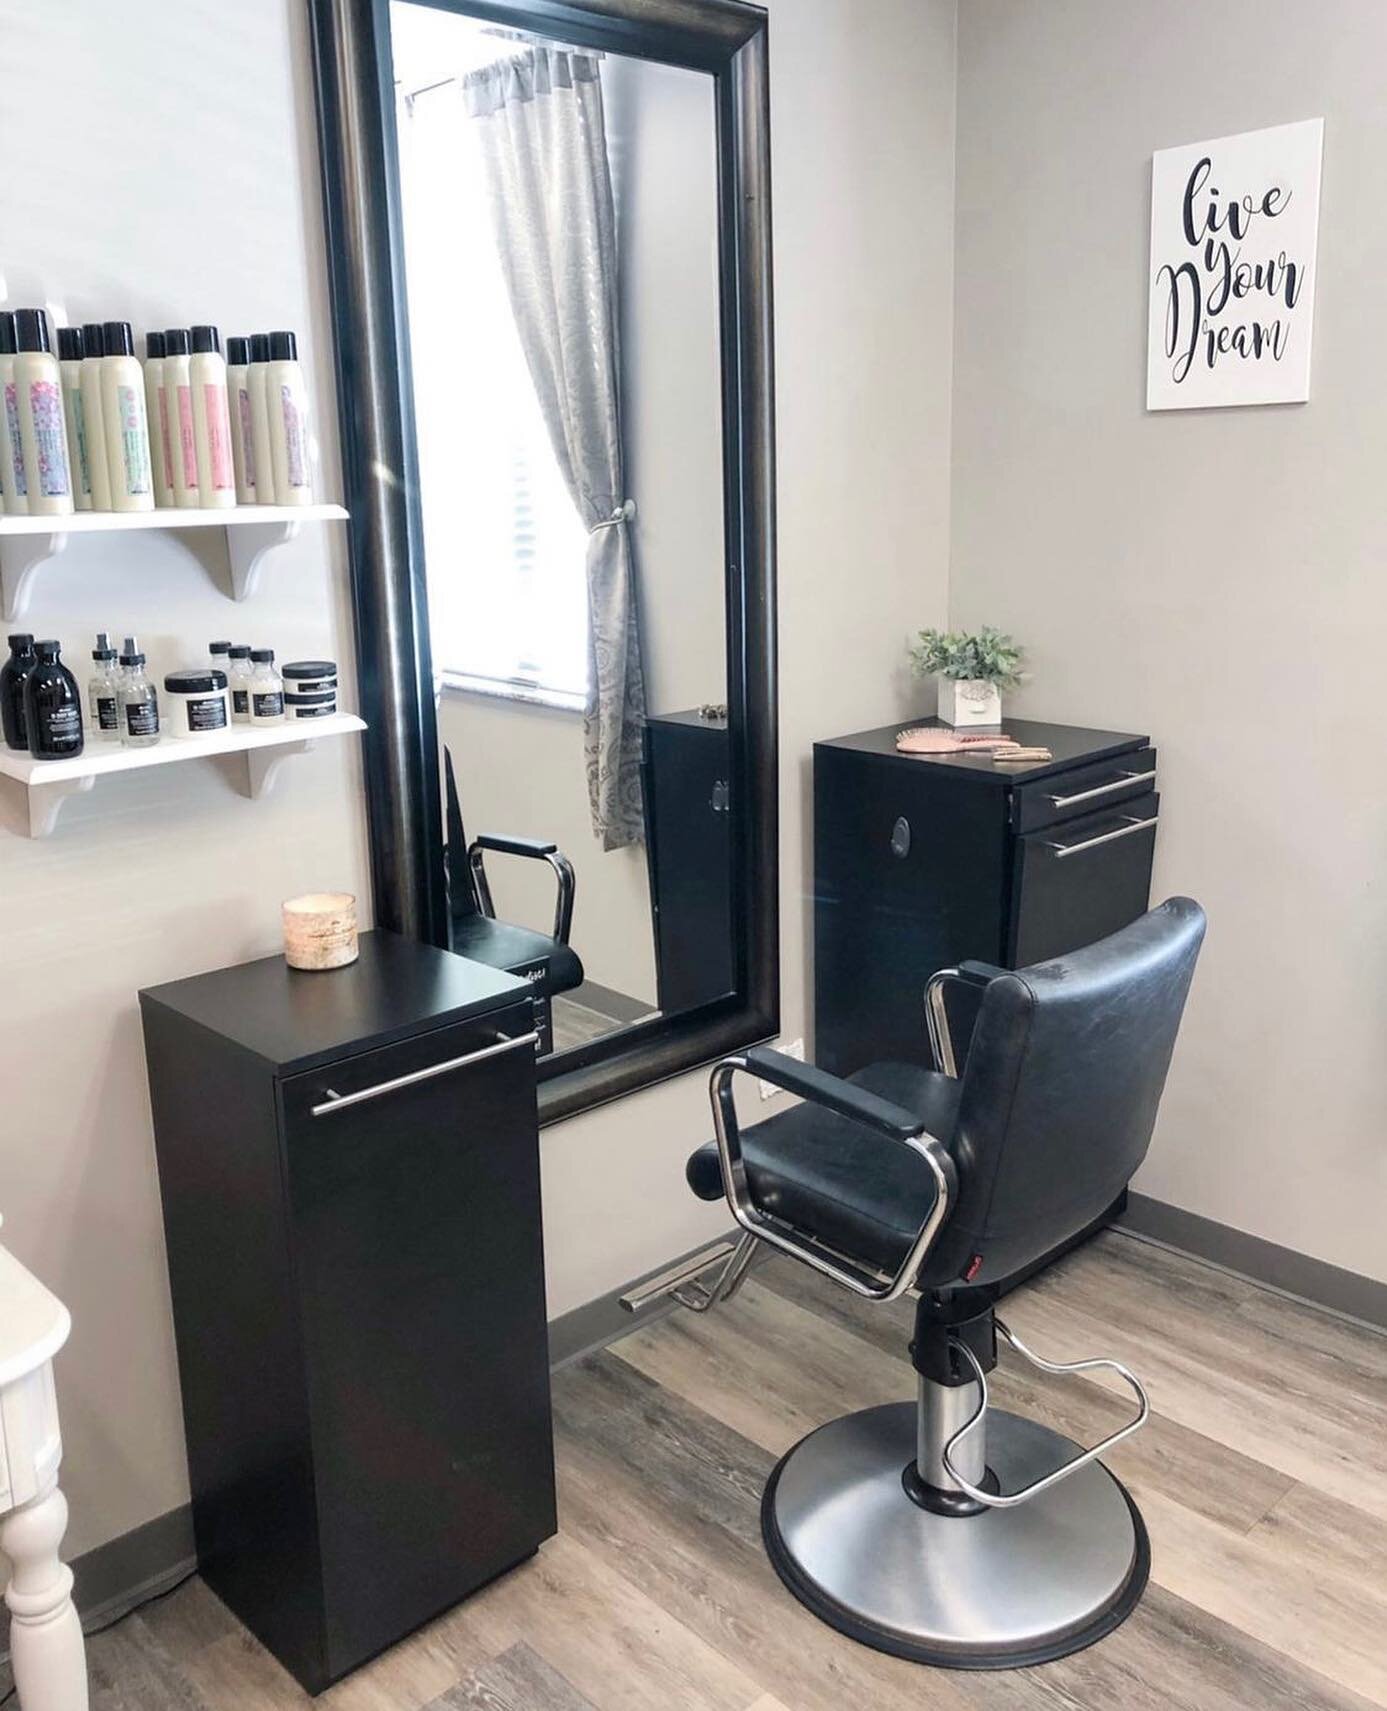 Who else counts down to the day of their hair appointment?

You can&rsquo;t wait to have your color retouched, get those fresh feeling ends again, maybe try something new?

We know how much you look forward to your time out of your daily routine to f